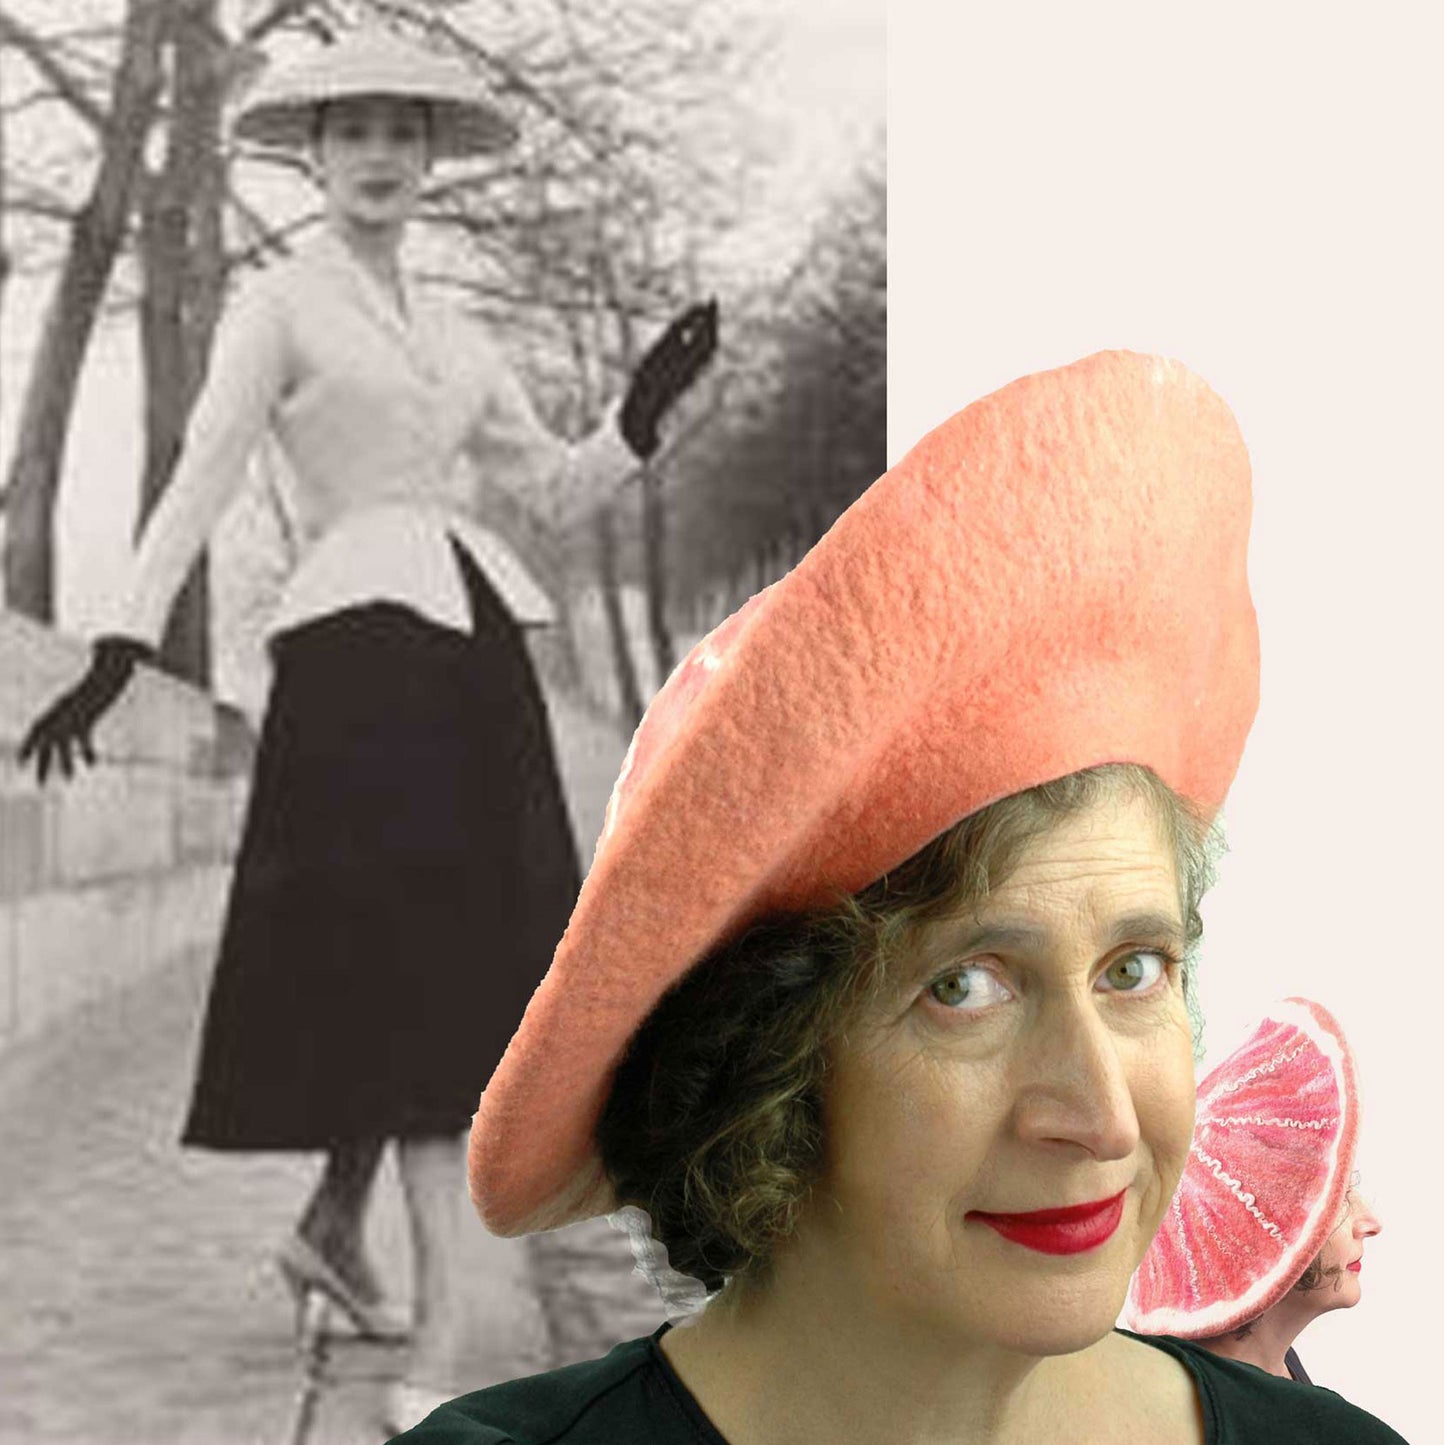 New Look Dior Photo collaged with pink grapefruit inspired felted hat.